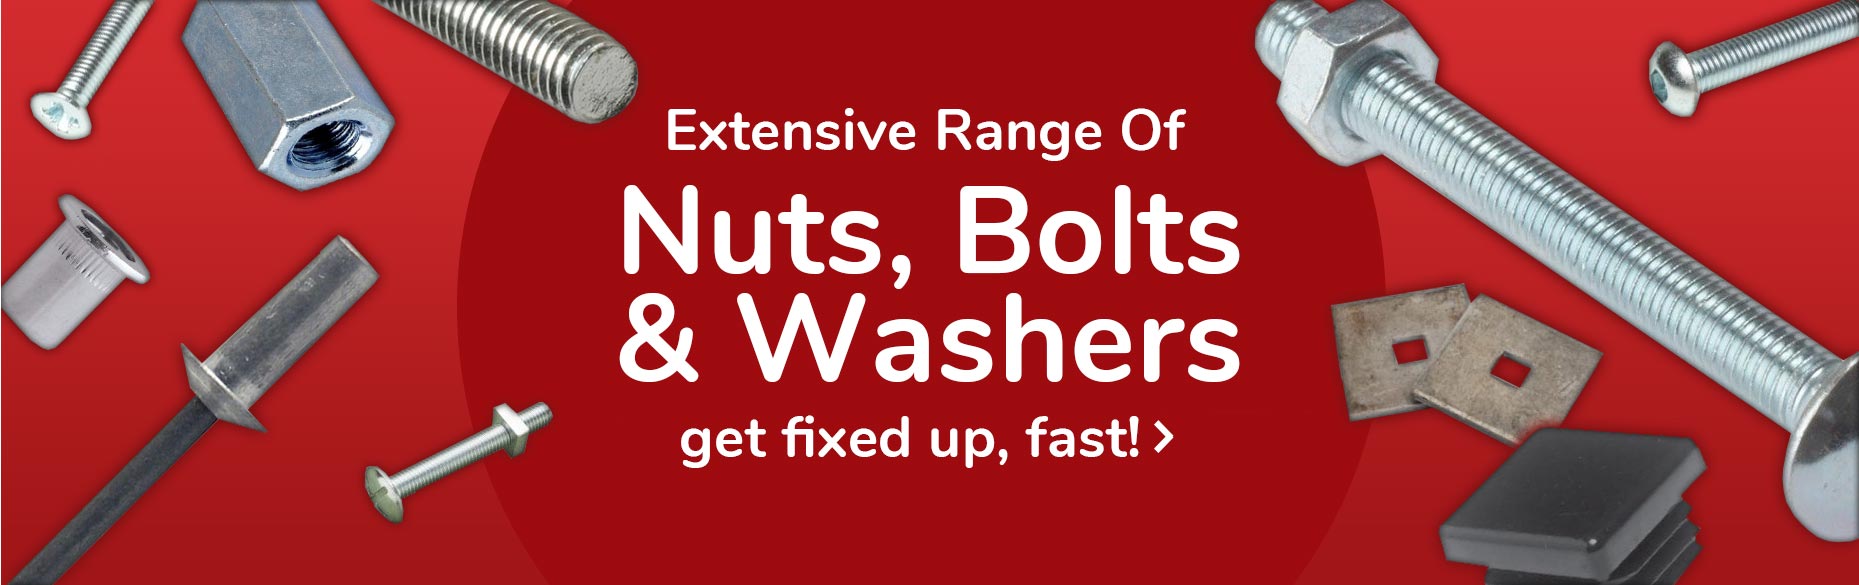 Website header image - red background with nuts & bolts